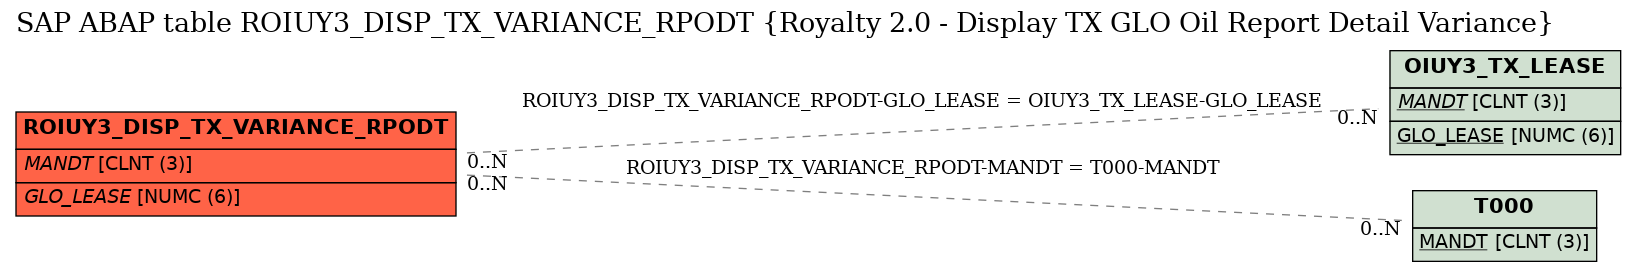 E-R Diagram for table ROIUY3_DISP_TX_VARIANCE_RPODT (Royalty 2.0 - Display TX GLO Oil Report Detail Variance)